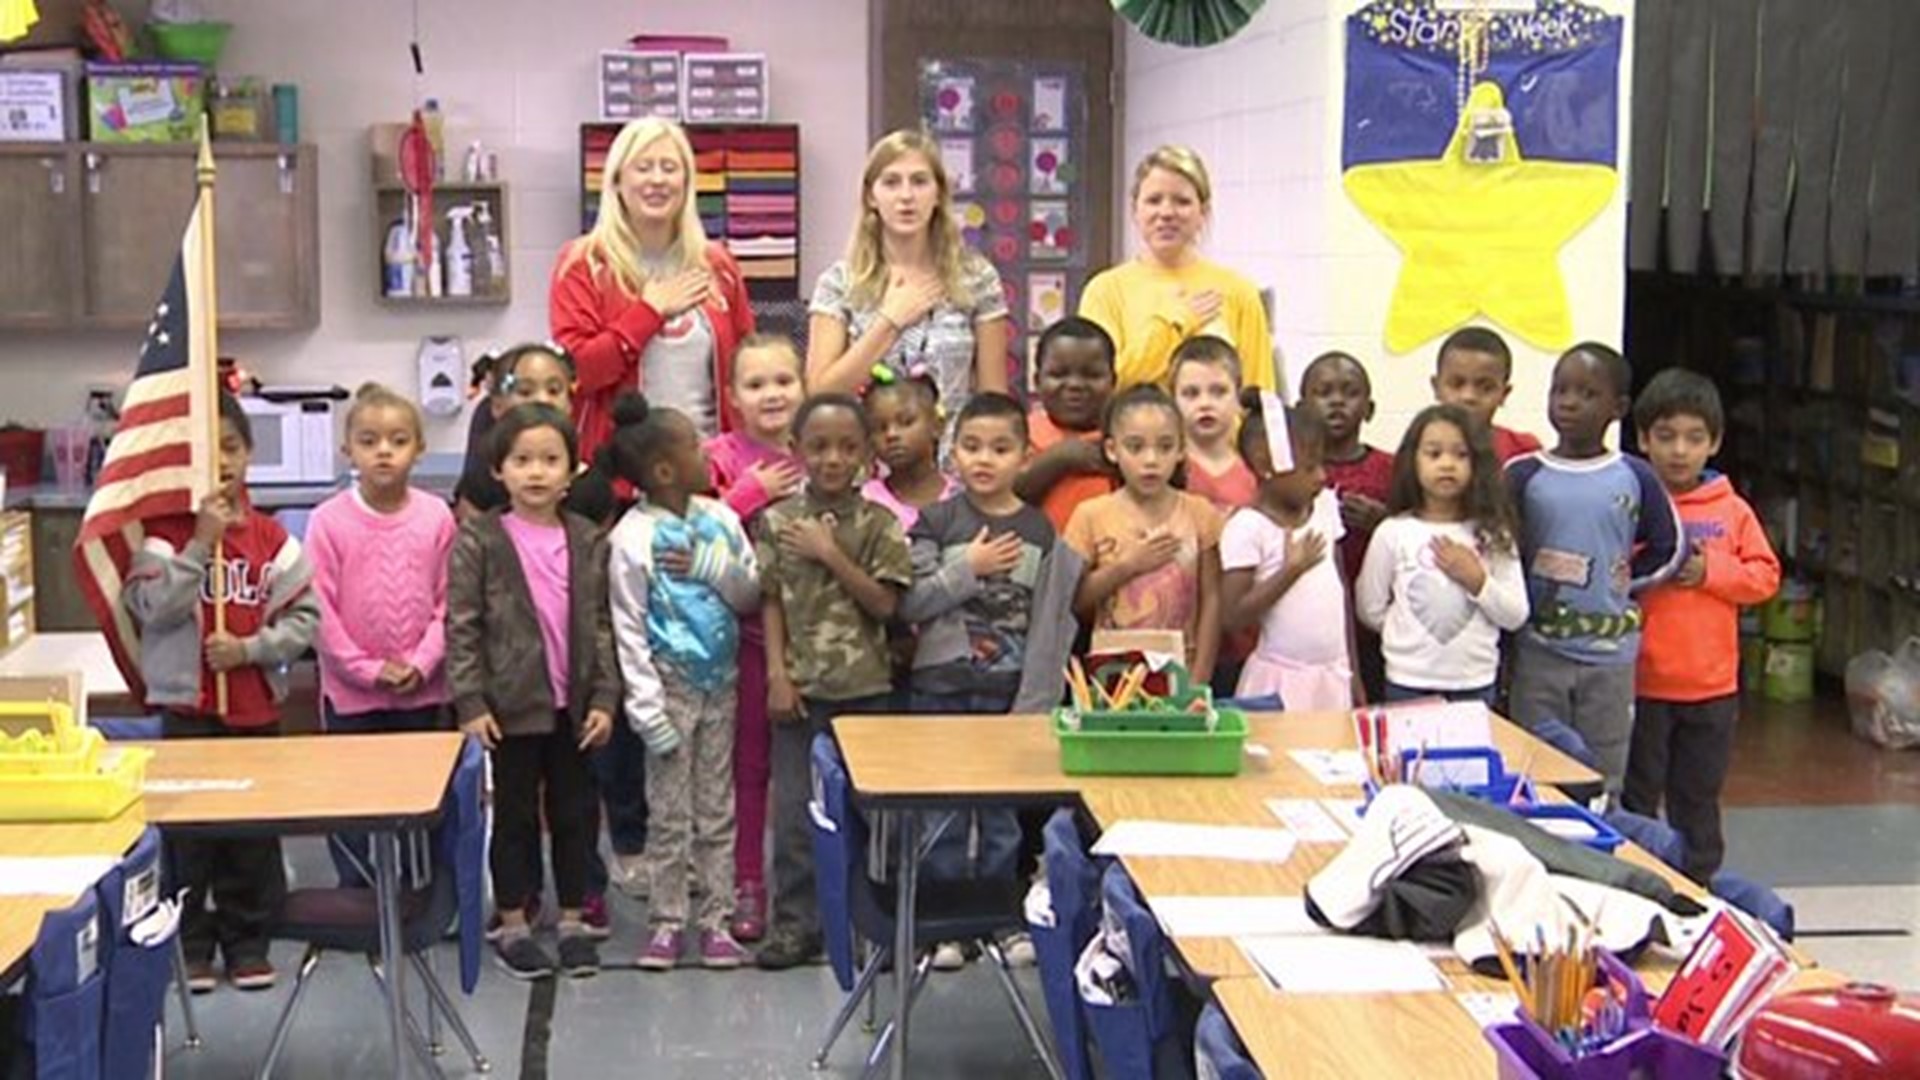 The Pledge from Mrs. Reeves` class